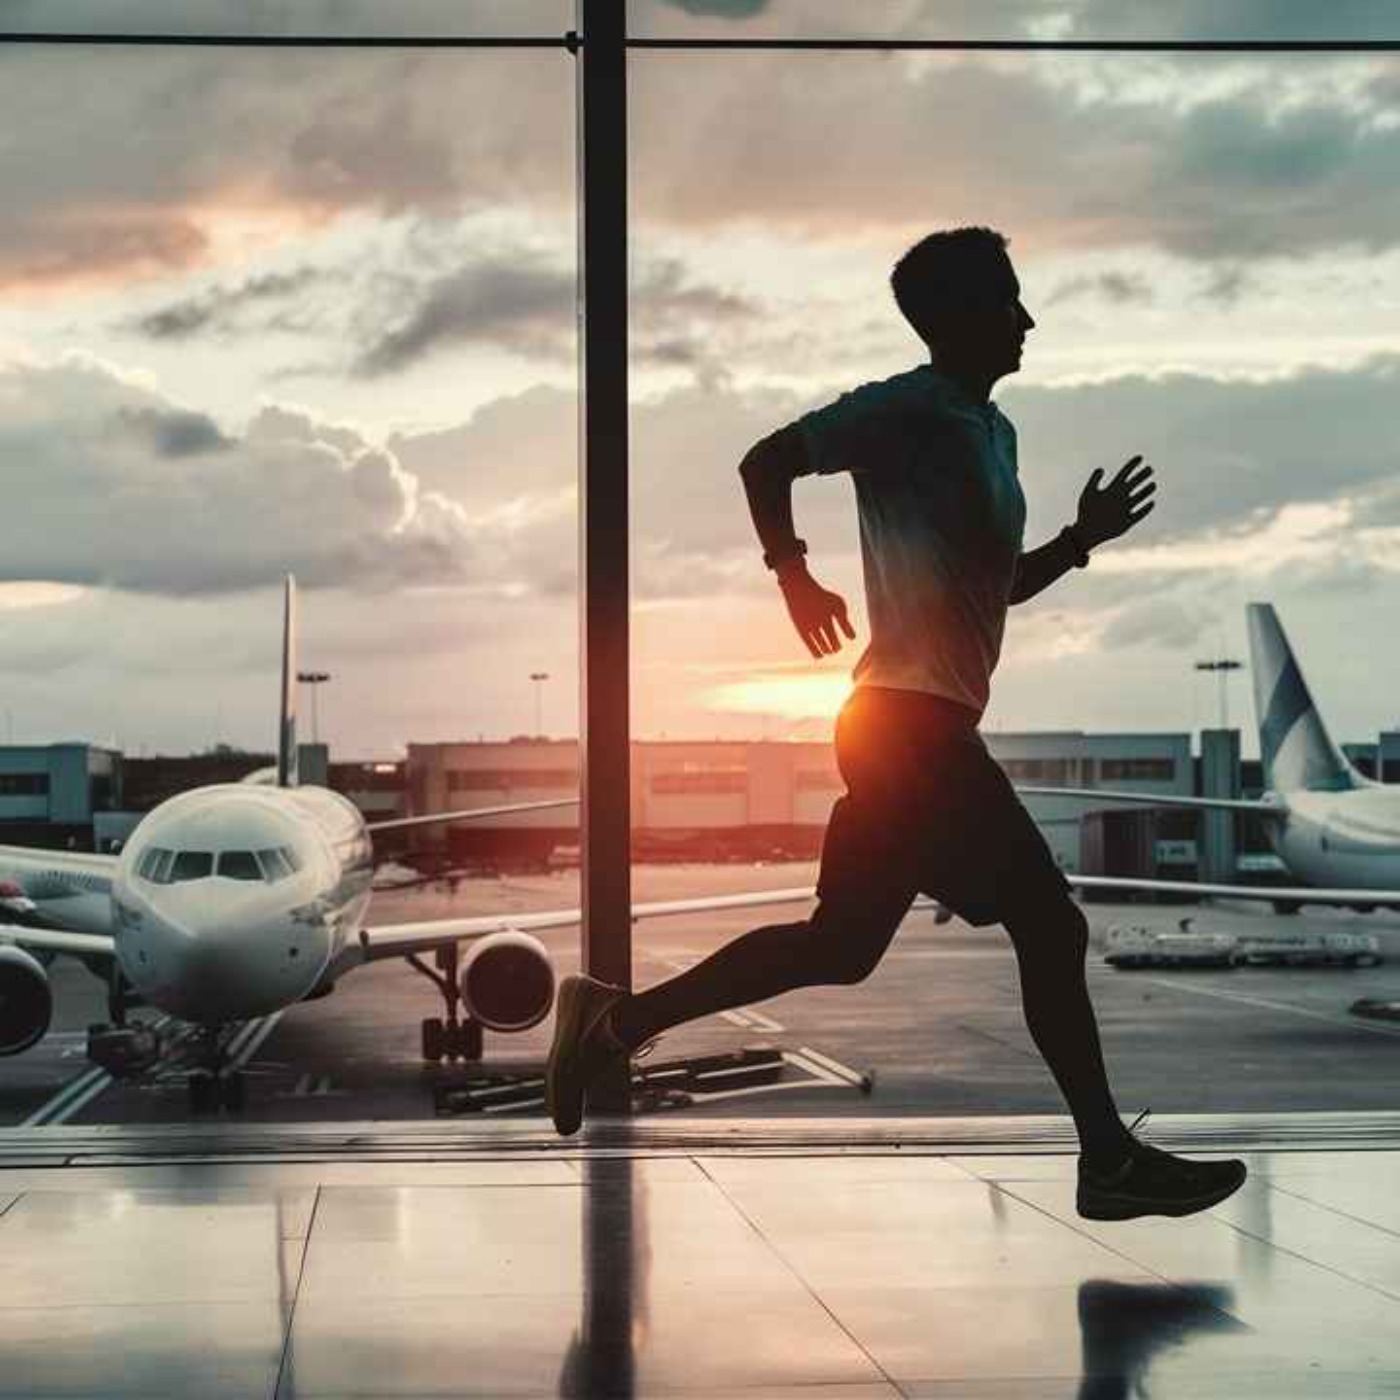 Travel & Fitness - An Unlikely Pair